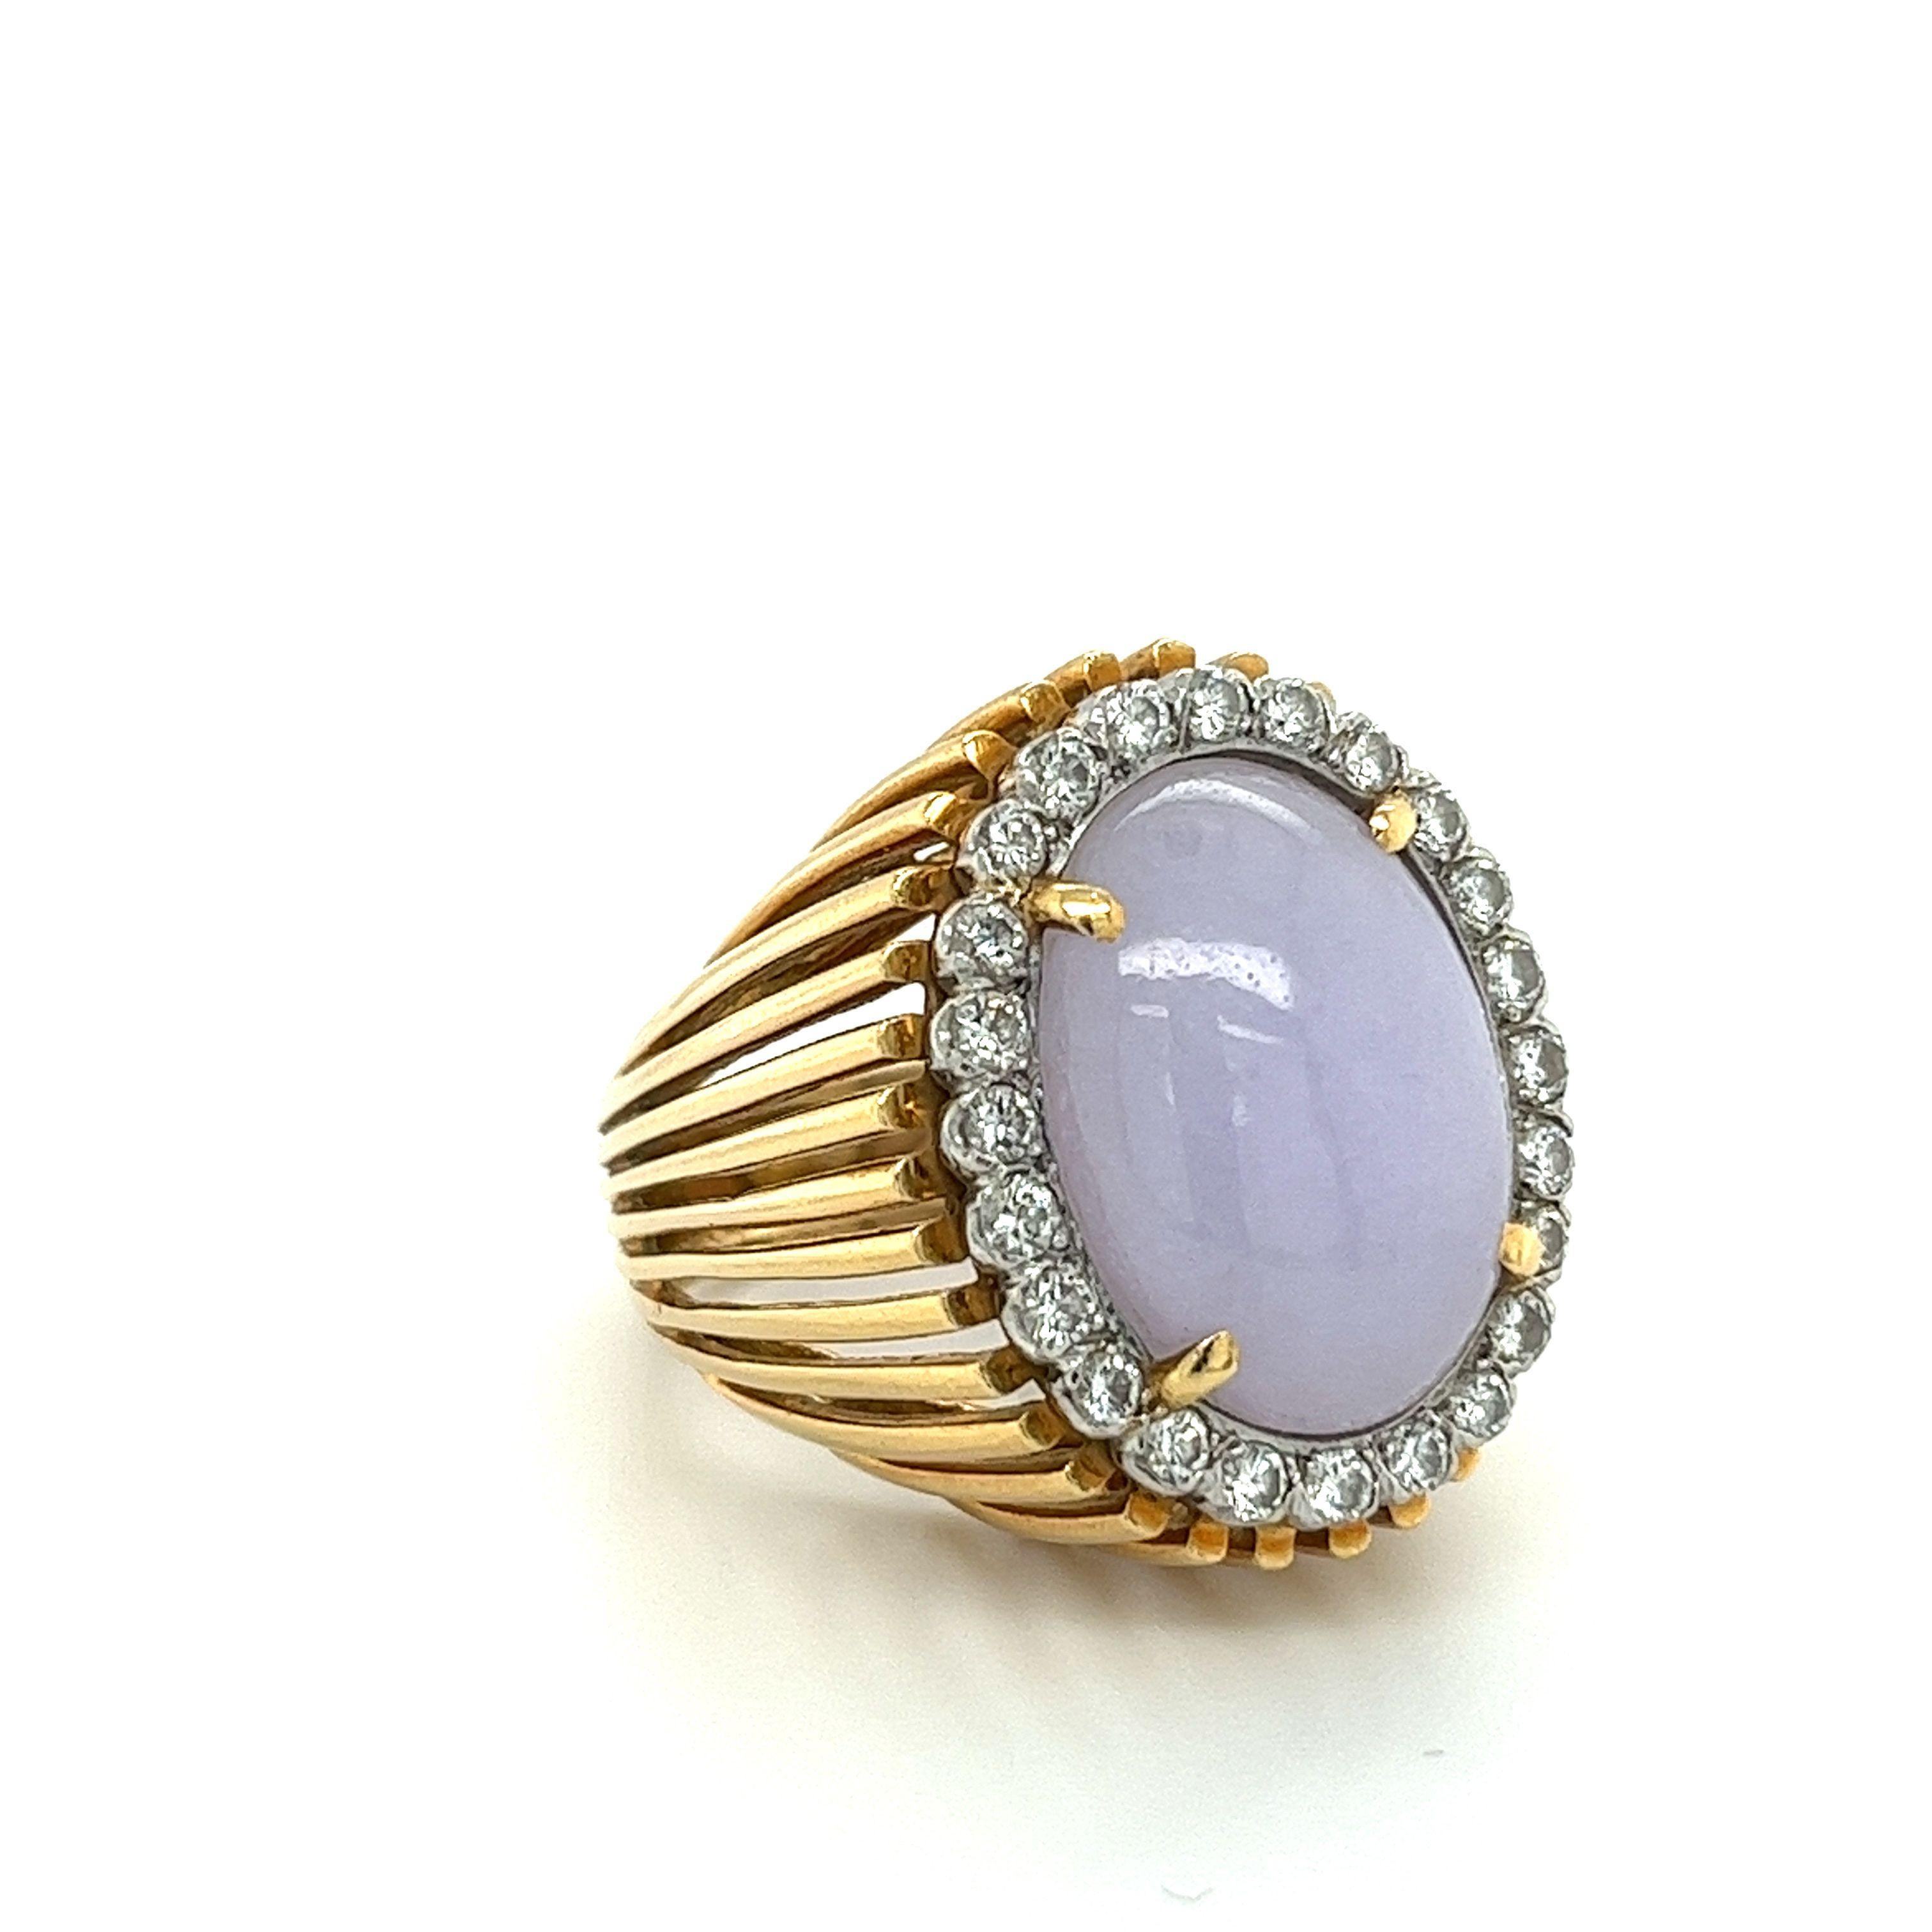 Experience the timeless sophistication of this stunning lavender jade ring. The oval shape cabochon cut jade has been certified as a Type A natural jade by Mason Kay, a respected authority on the gemstone. This rare and high-quality jade has not